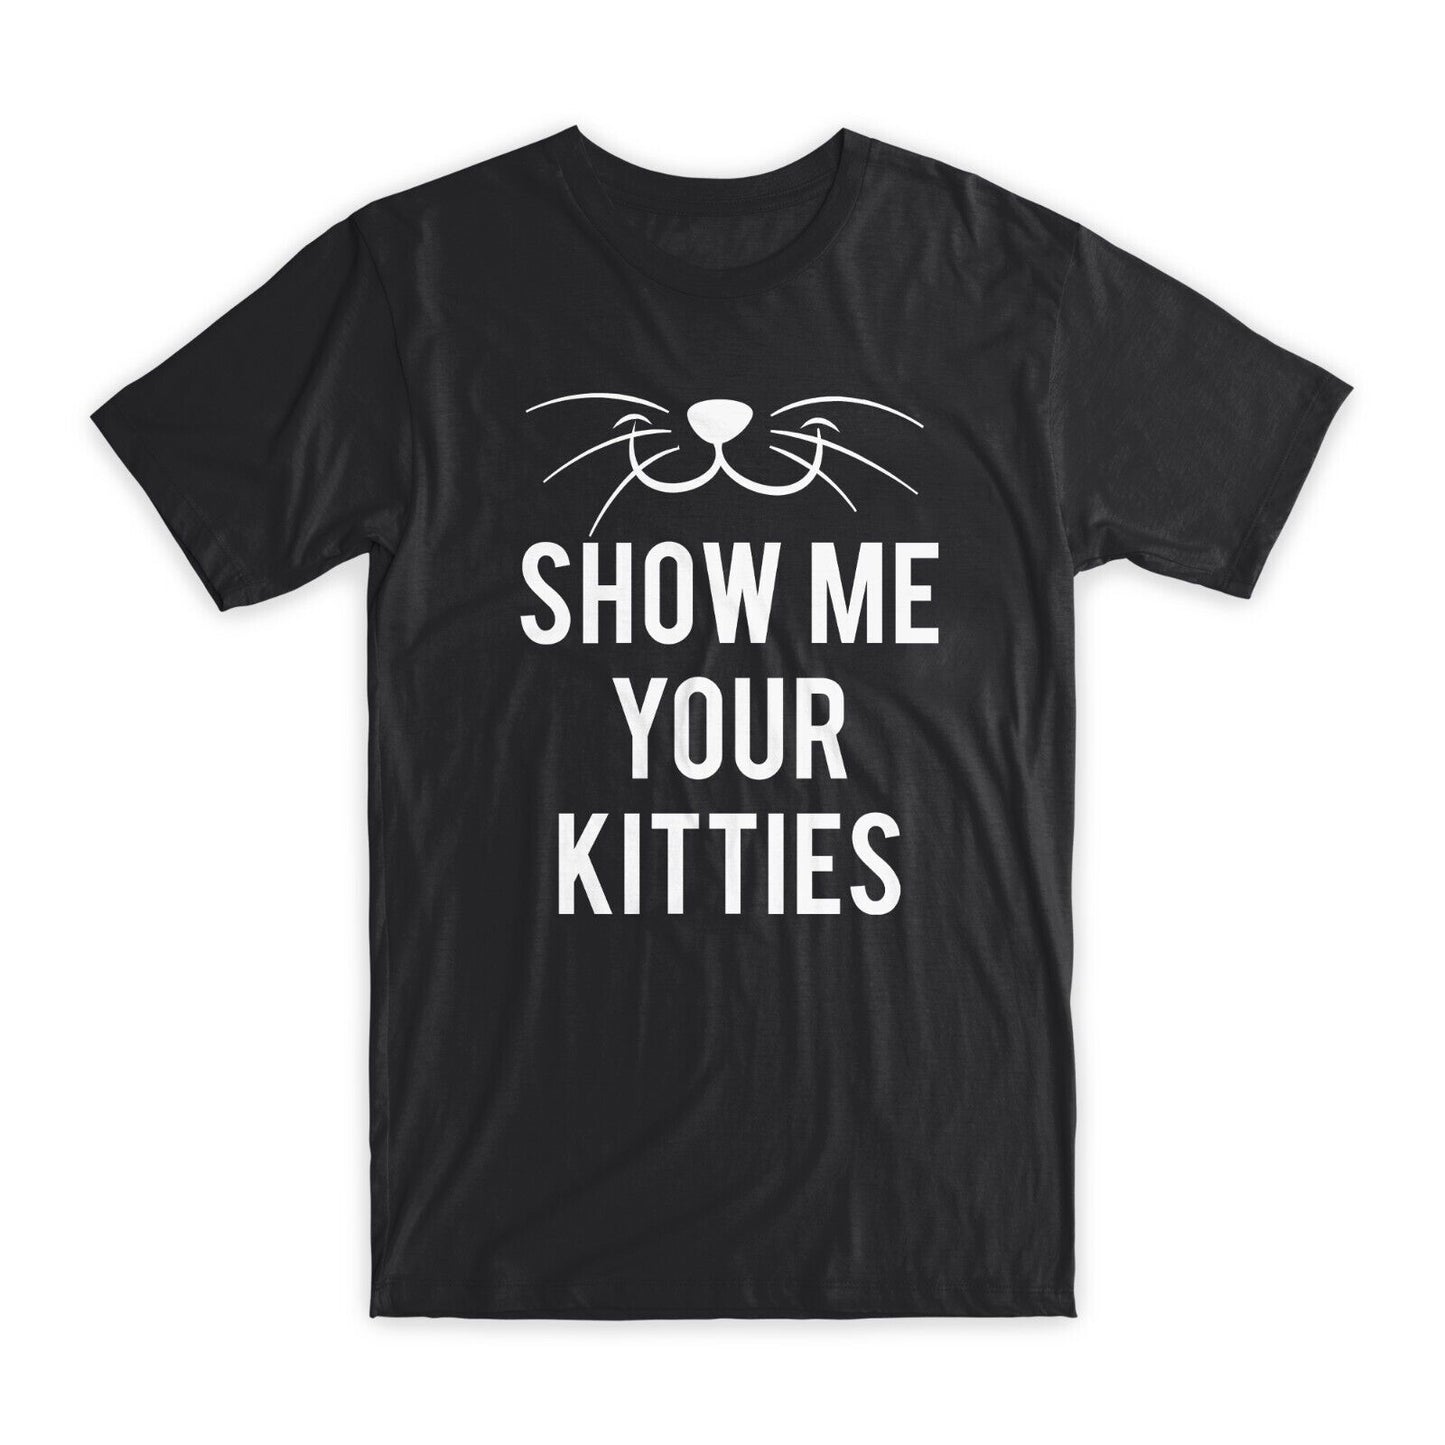 Show Me Your Kitties T-Shirt Premium Soft Cotton Crew Neck Funny Tees Gifts NEW